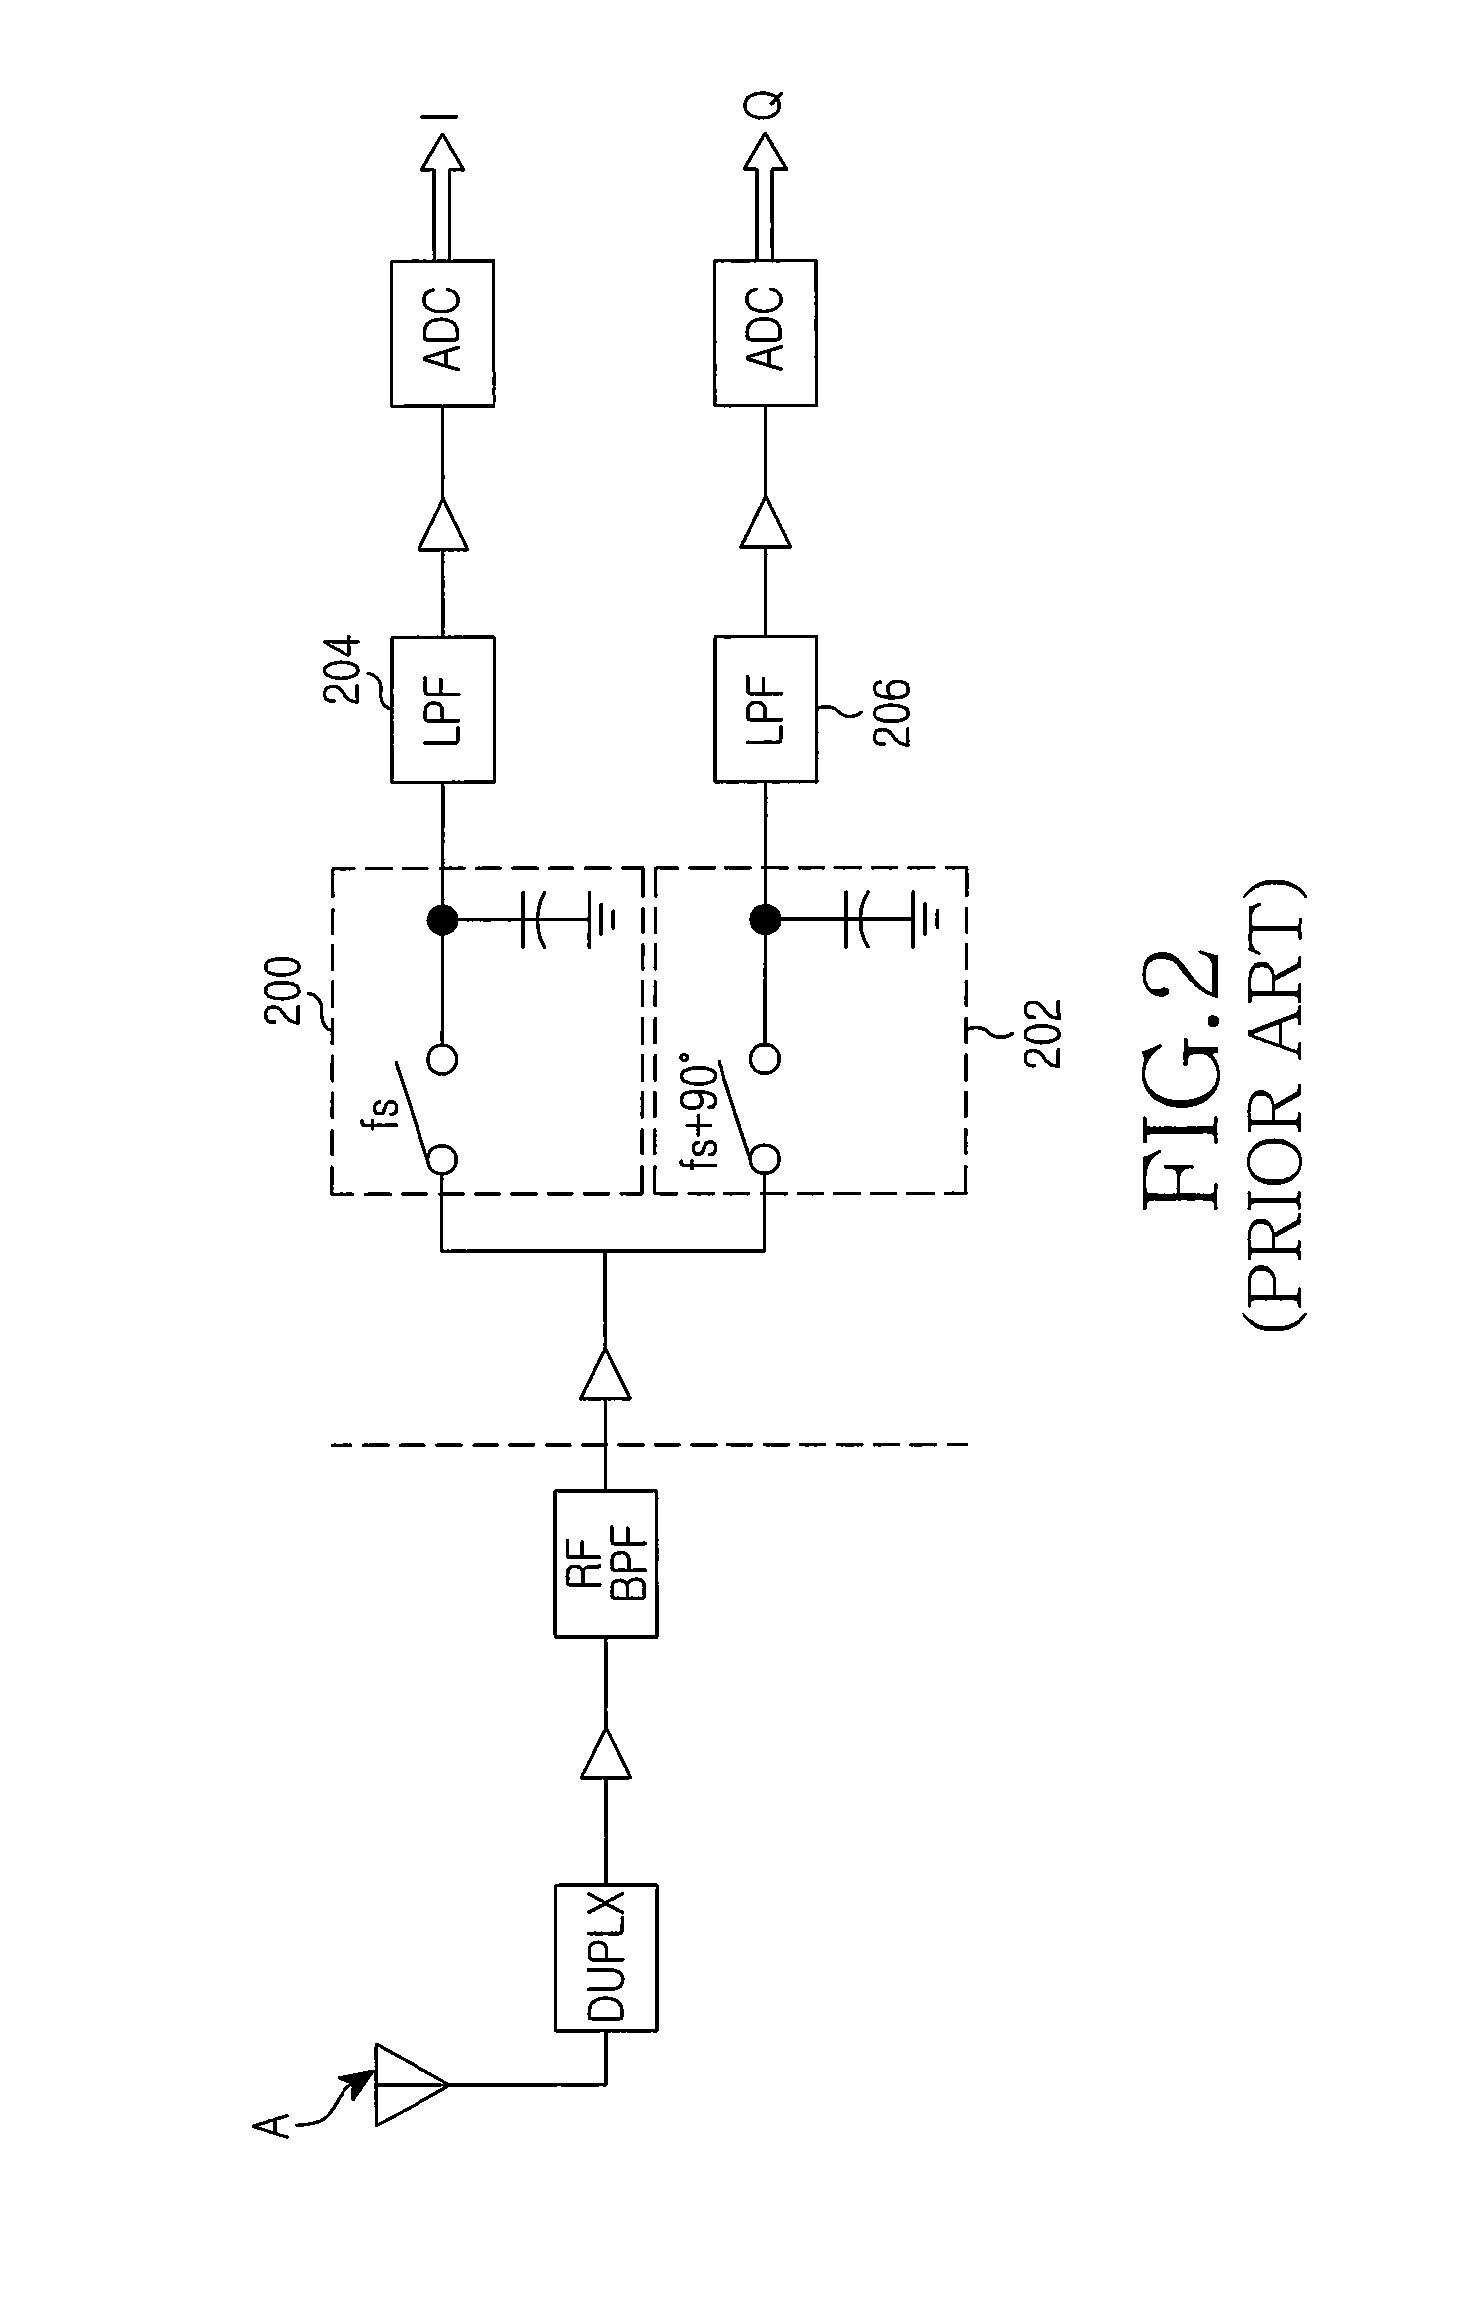 Apparatus and operating method of digital RF receiver in a wireless communication system